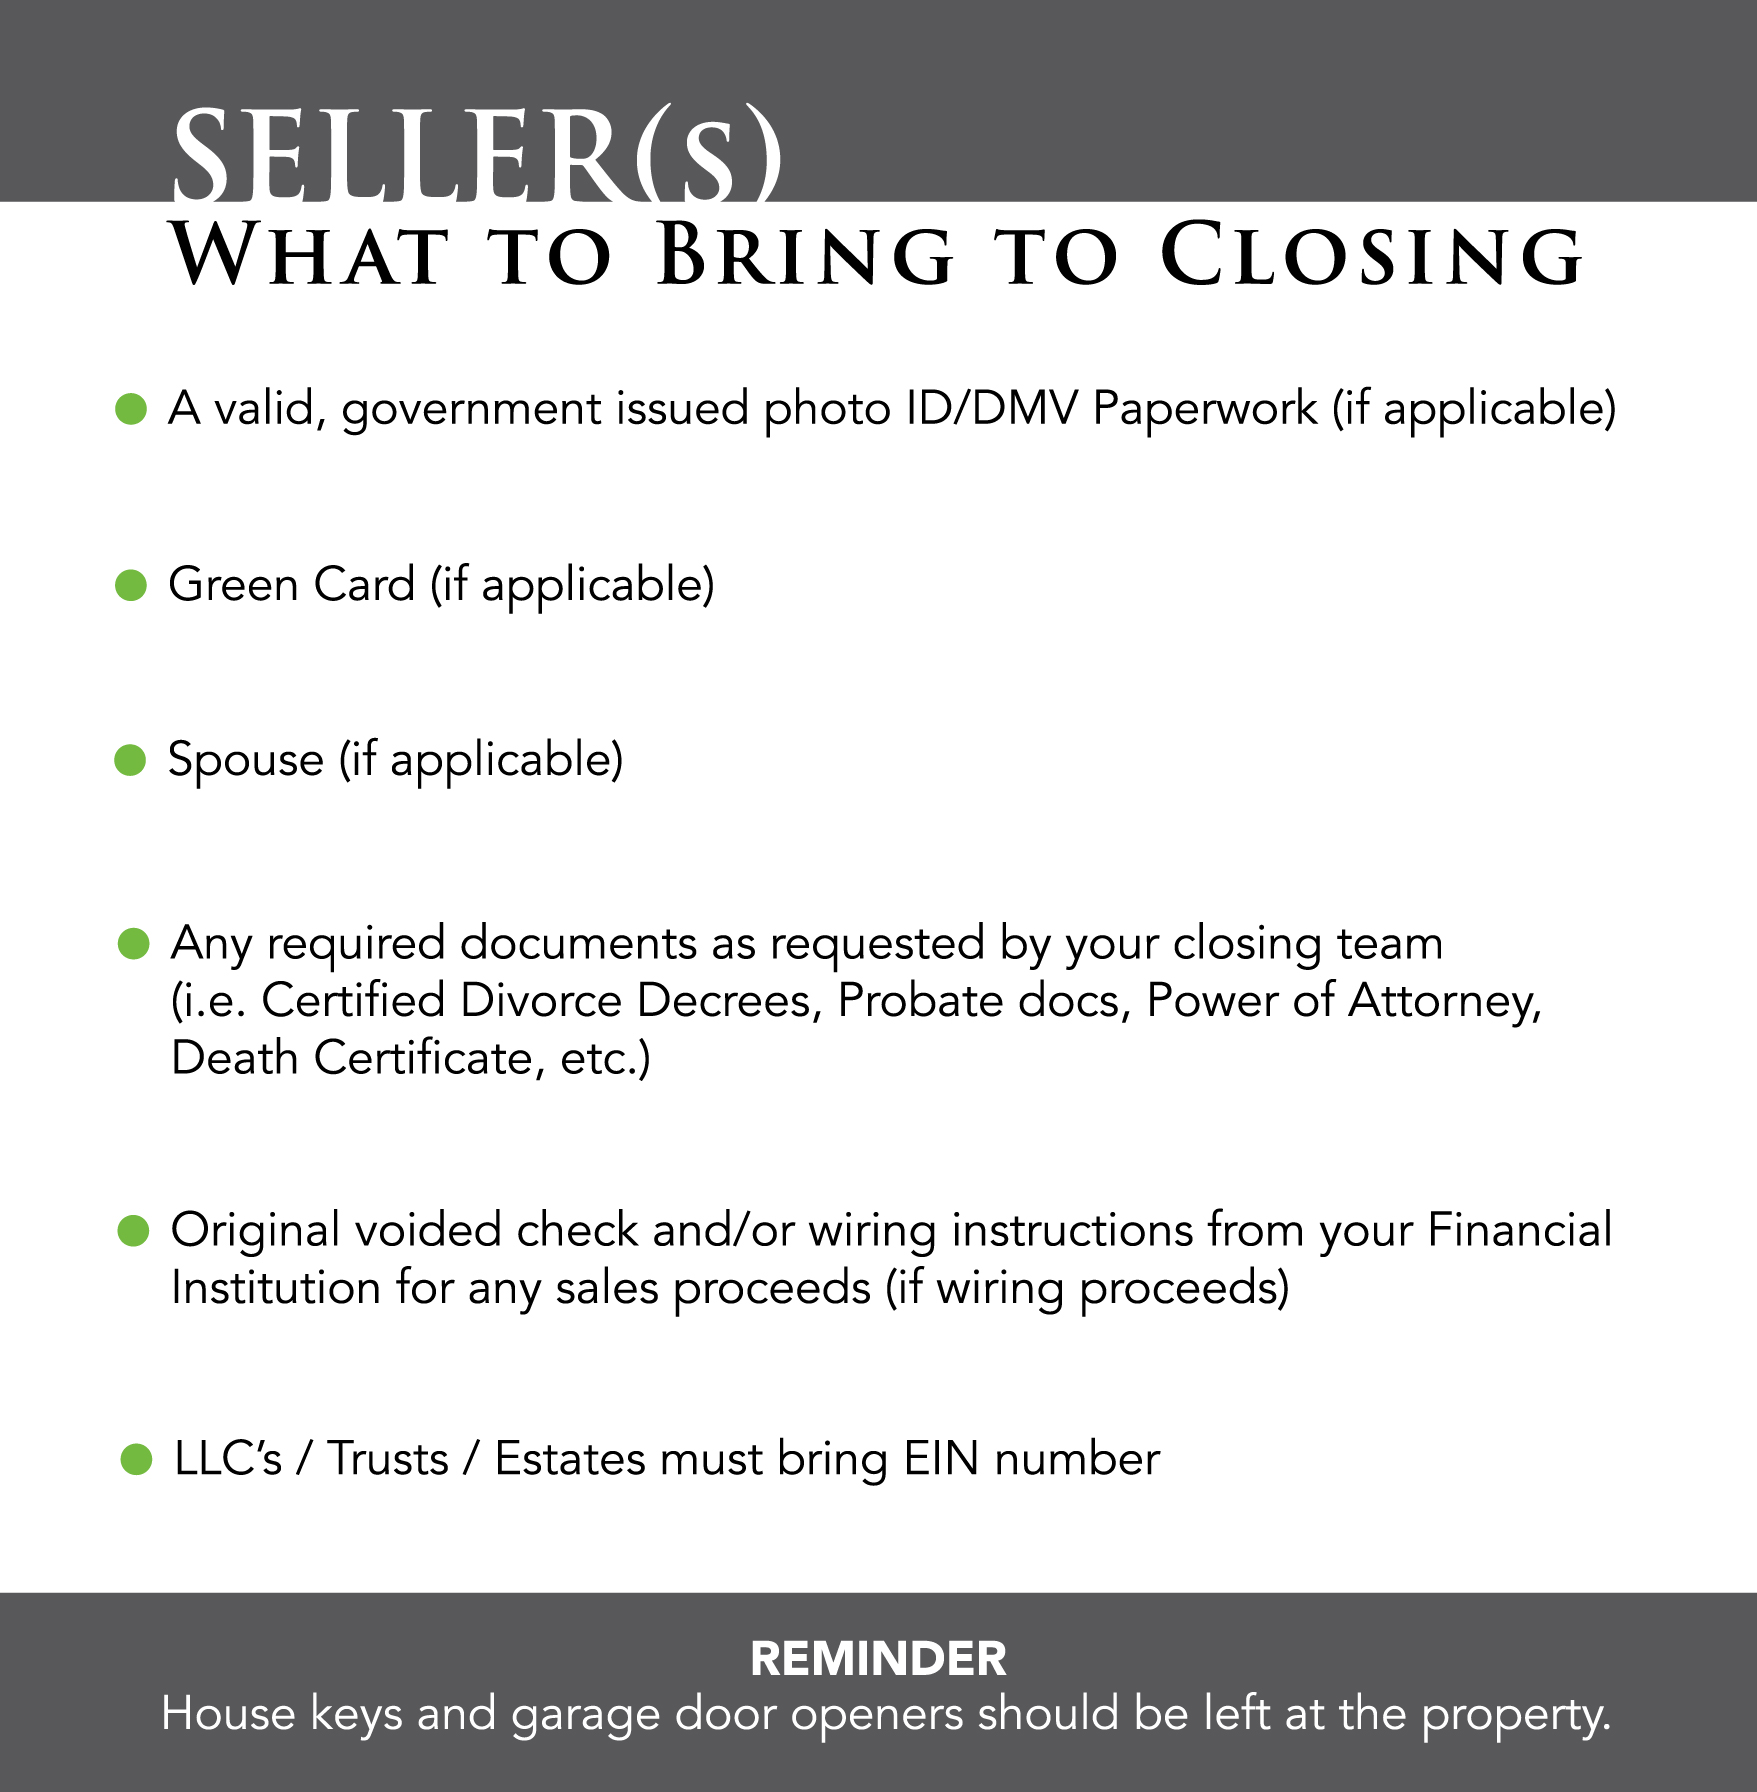 What To Bring To Closing - Sellers